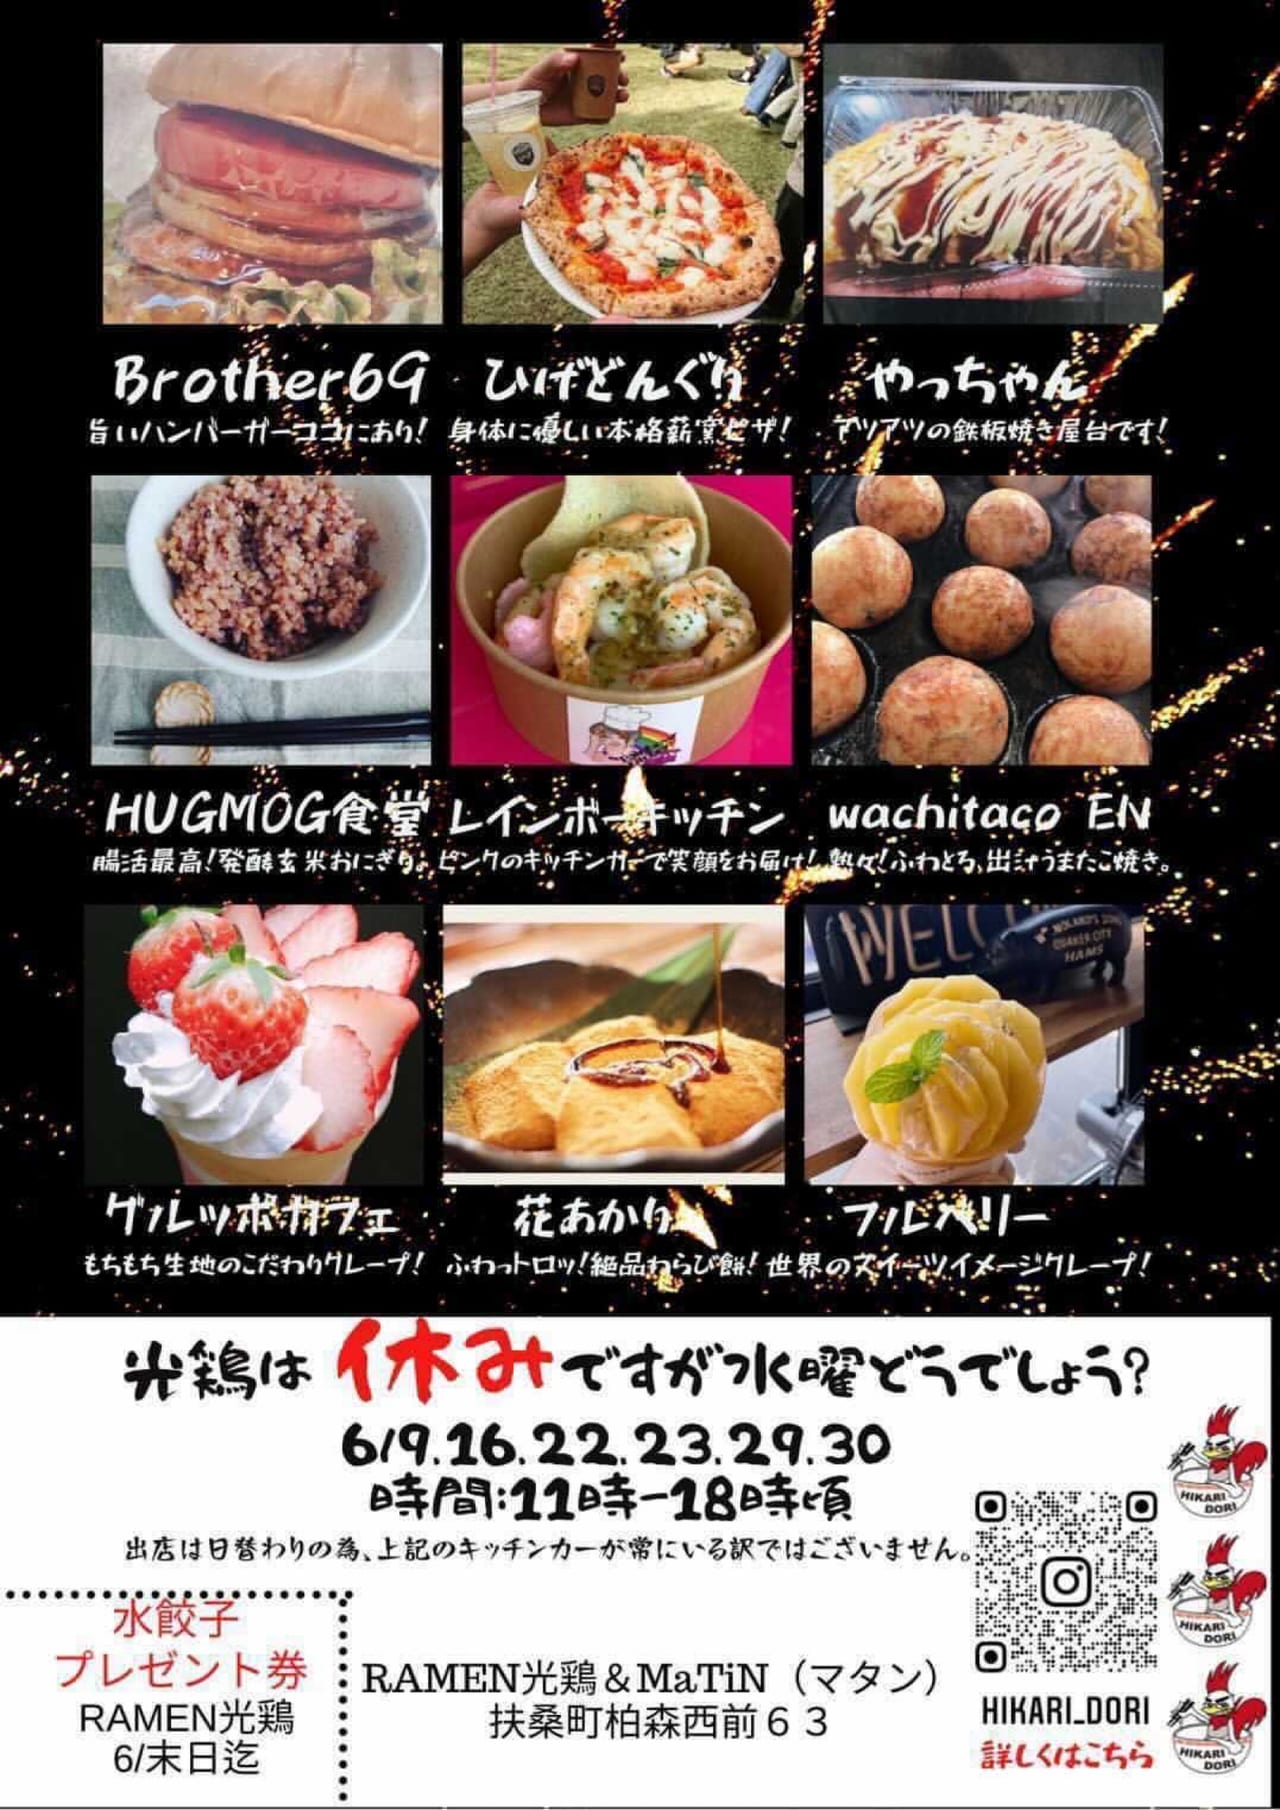 FOOD TRUCK PARTY 光鶏